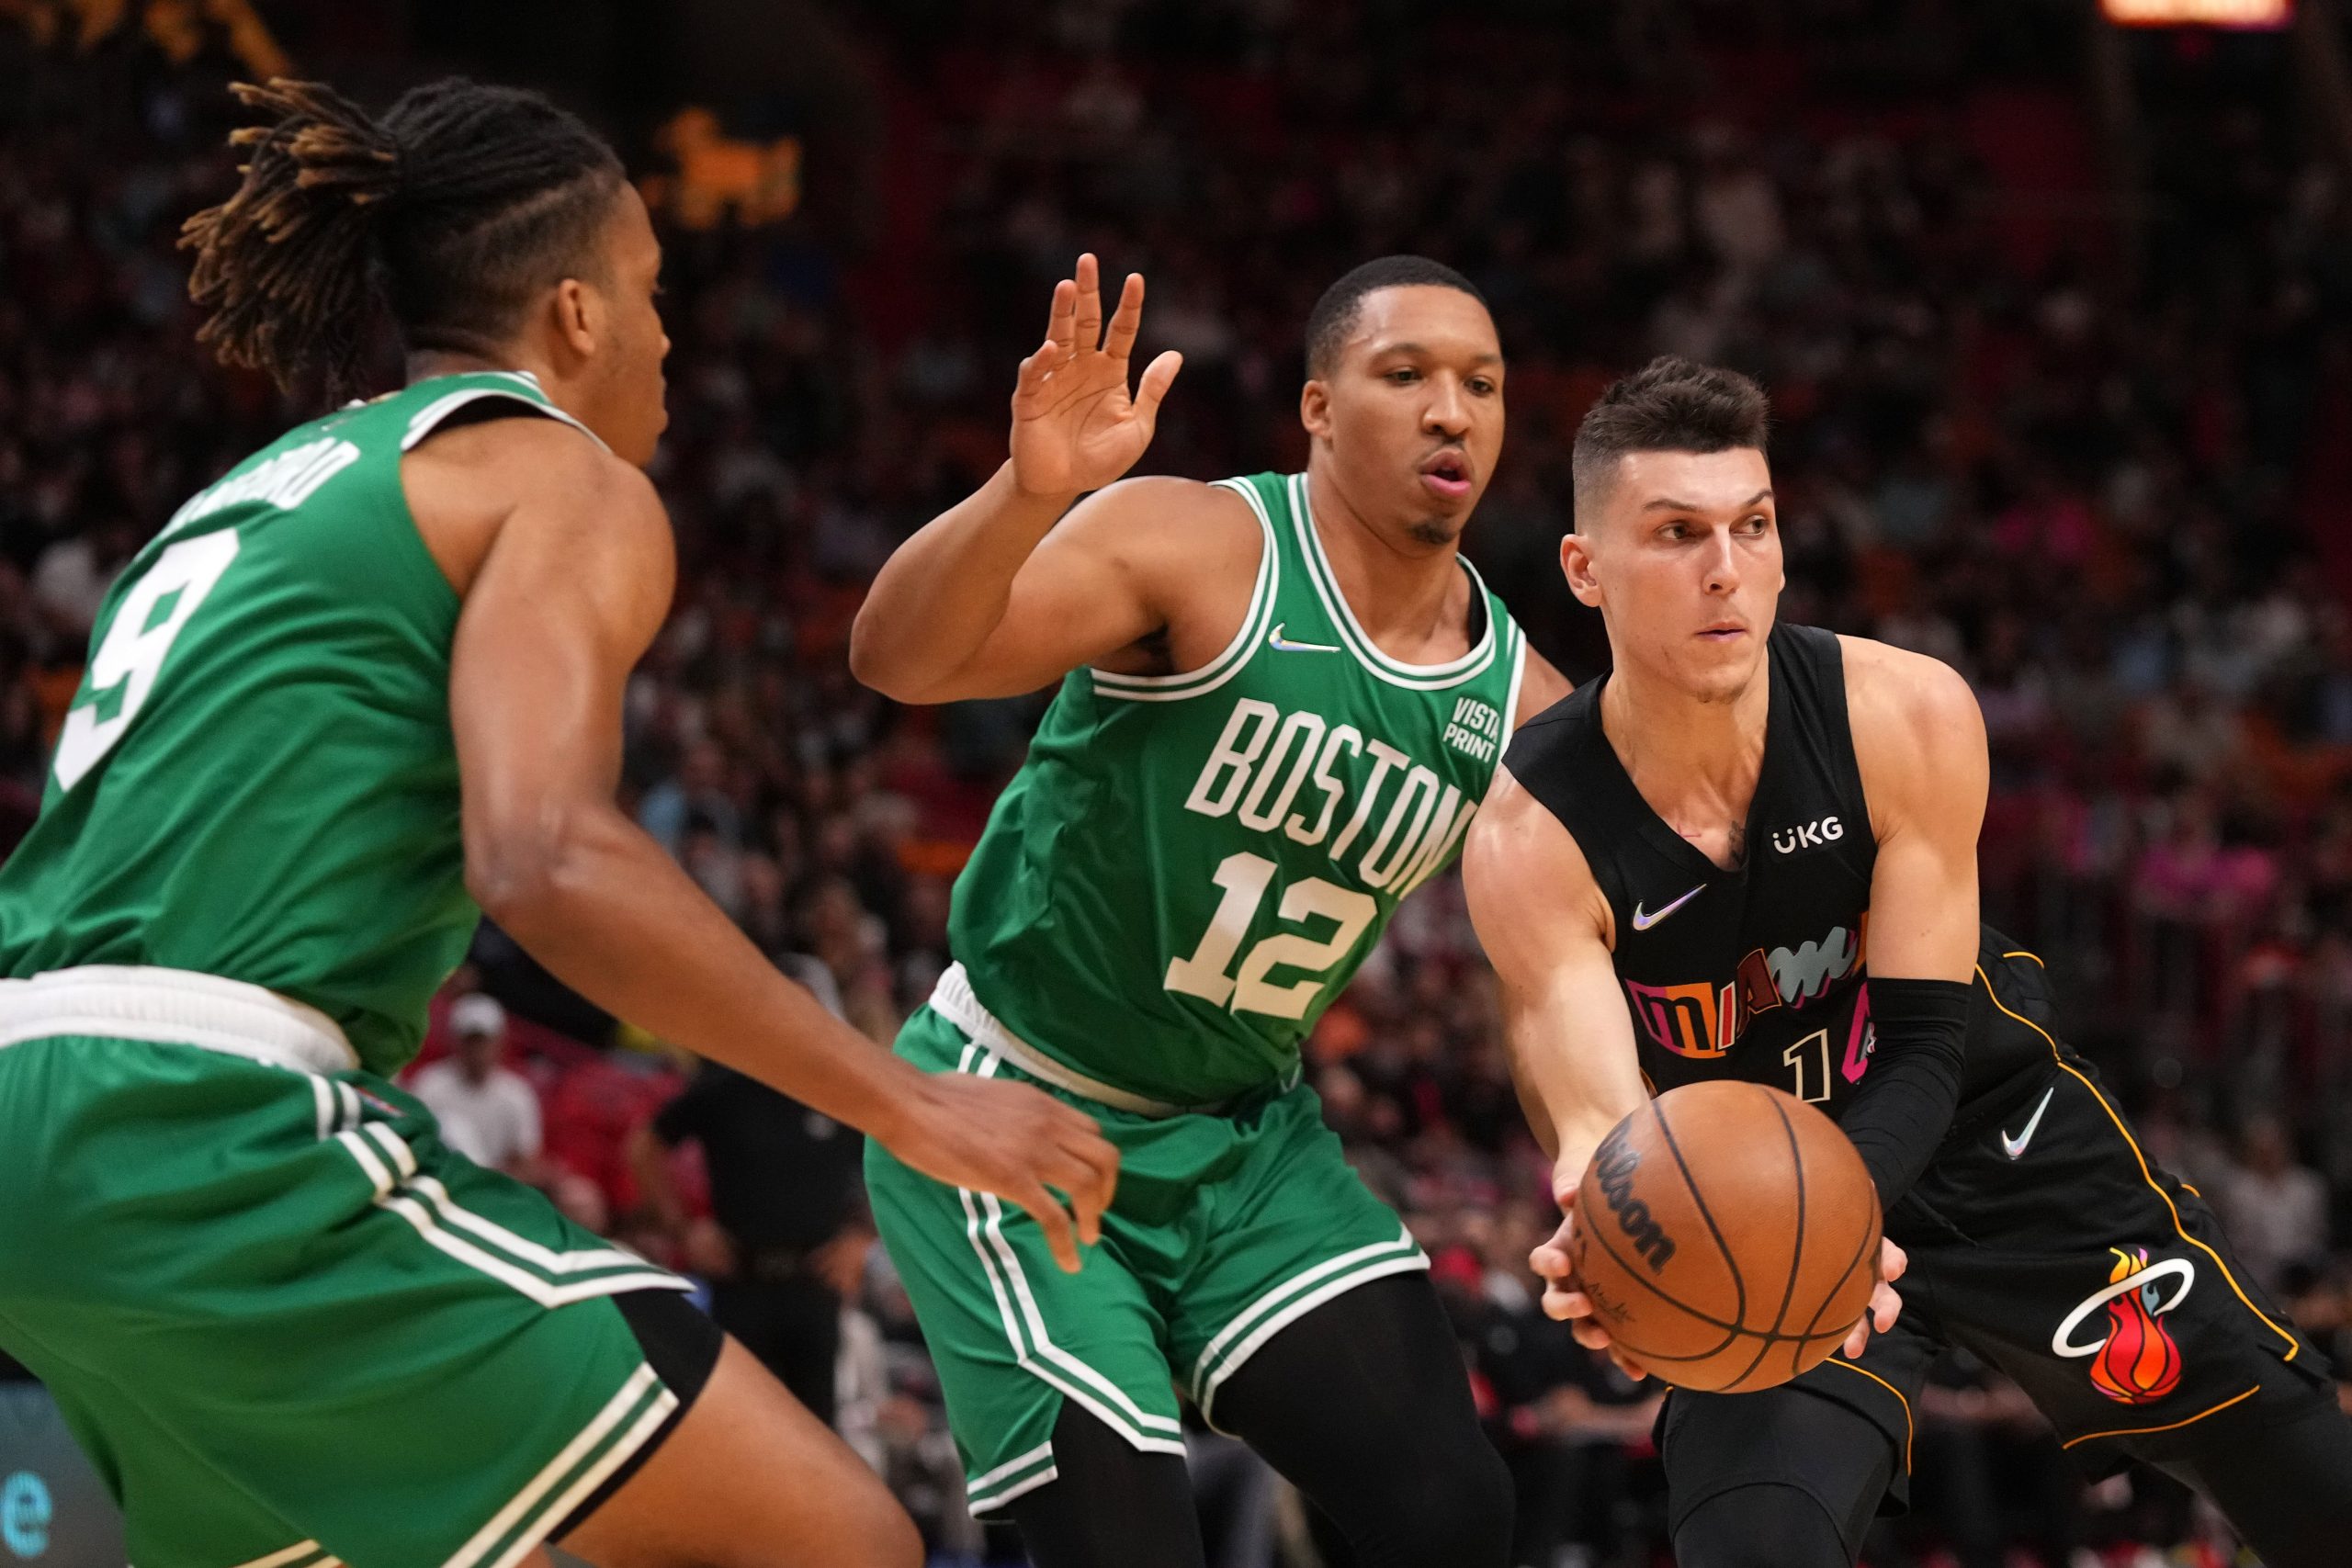 Miami Heat guard Tyler Herro (14) passes the ball away from Boston Celtics forward Grant Williams (12) during the first half at FTX Arena.